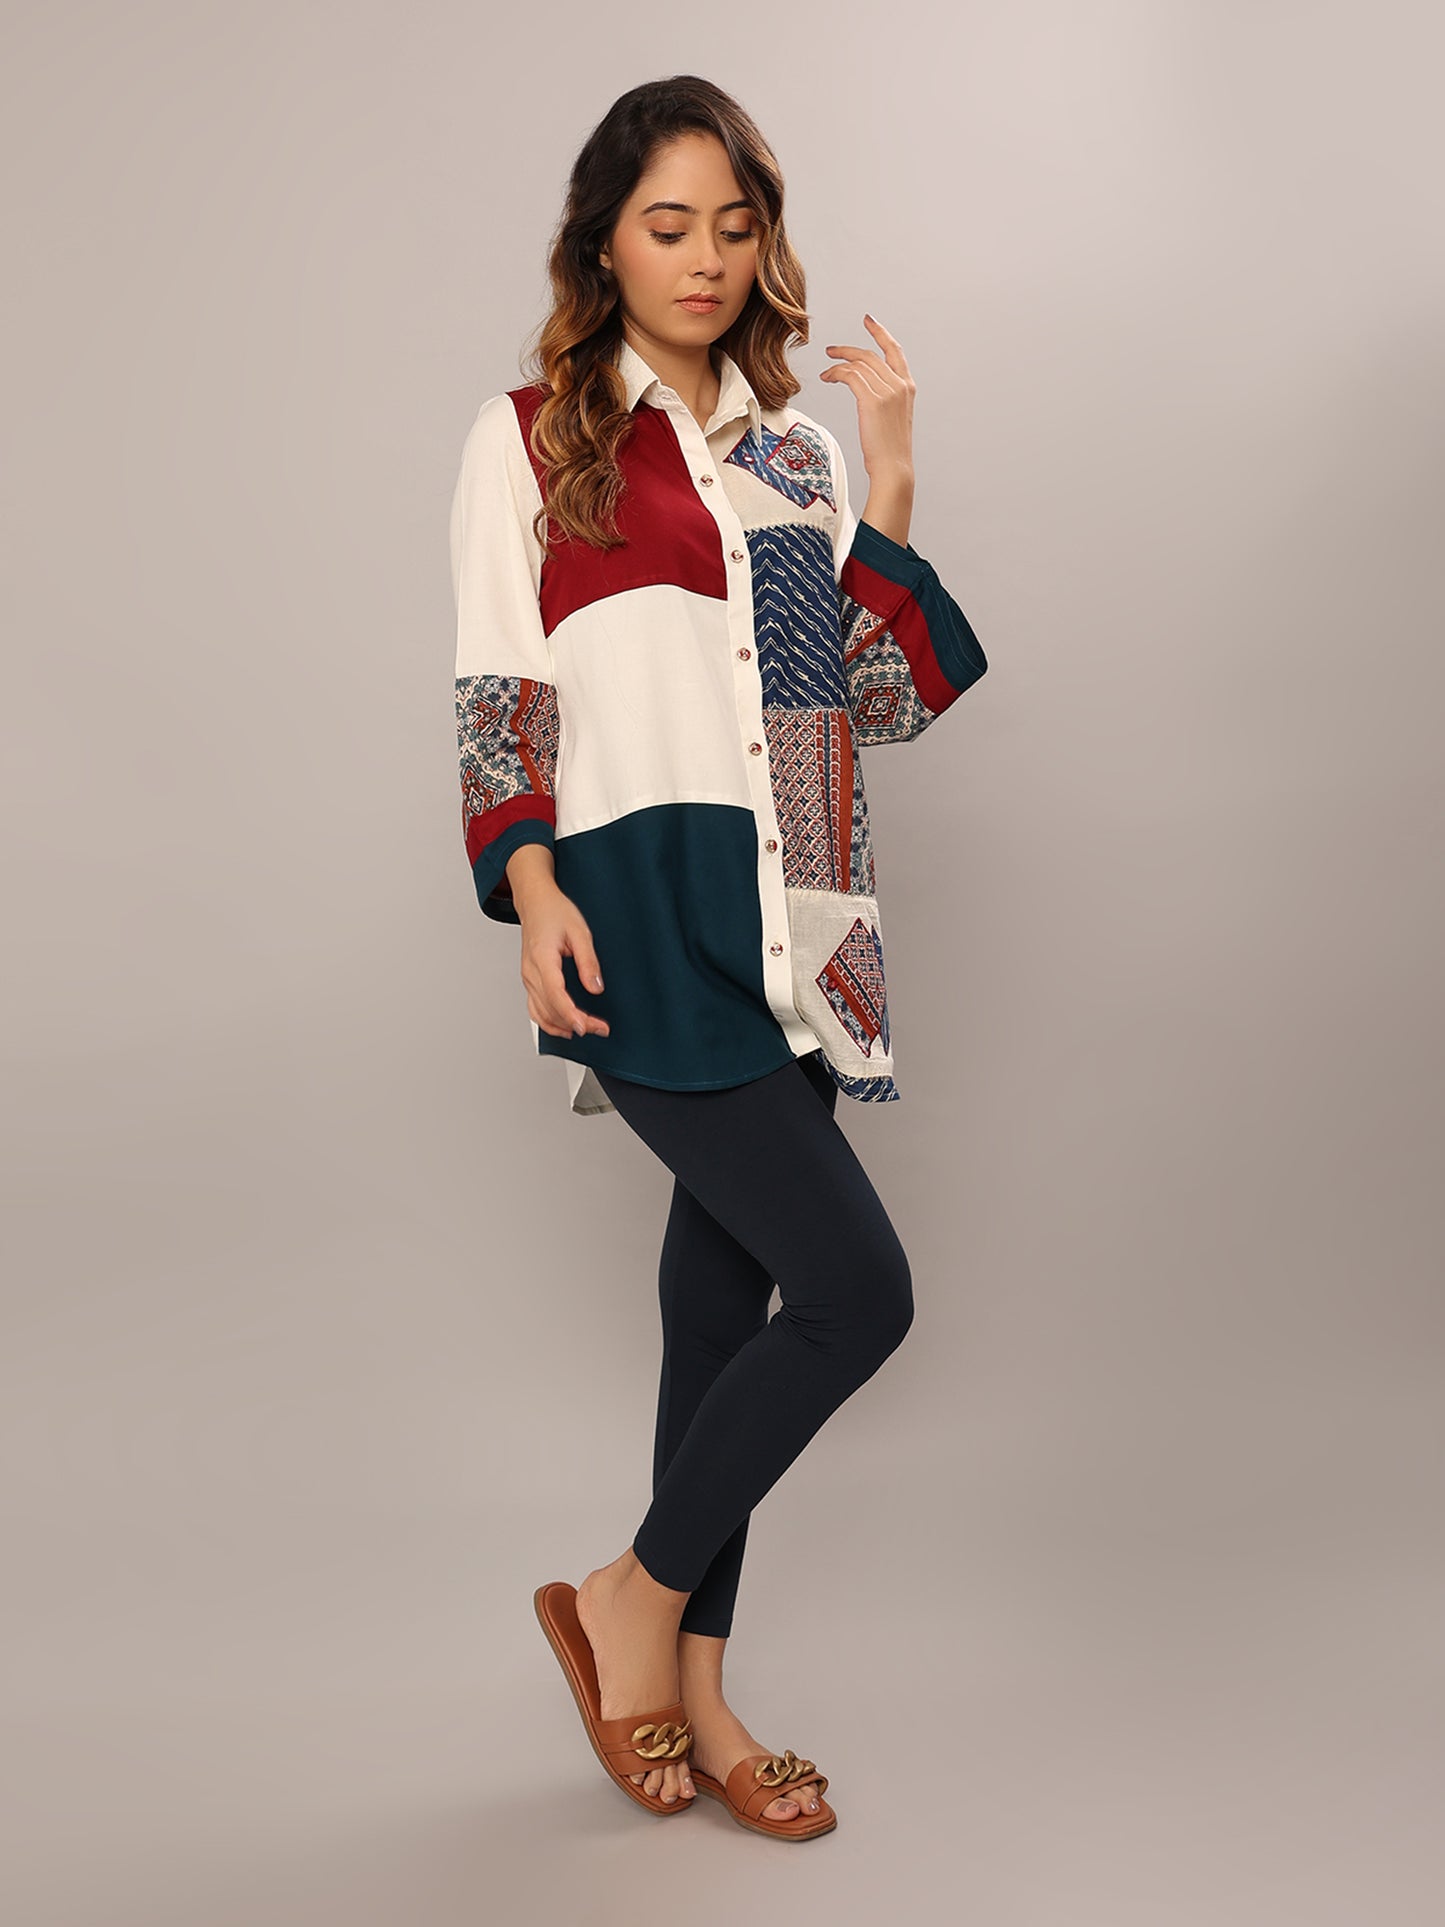 Vibrant Whimsy Patchwork Shirt - Amore